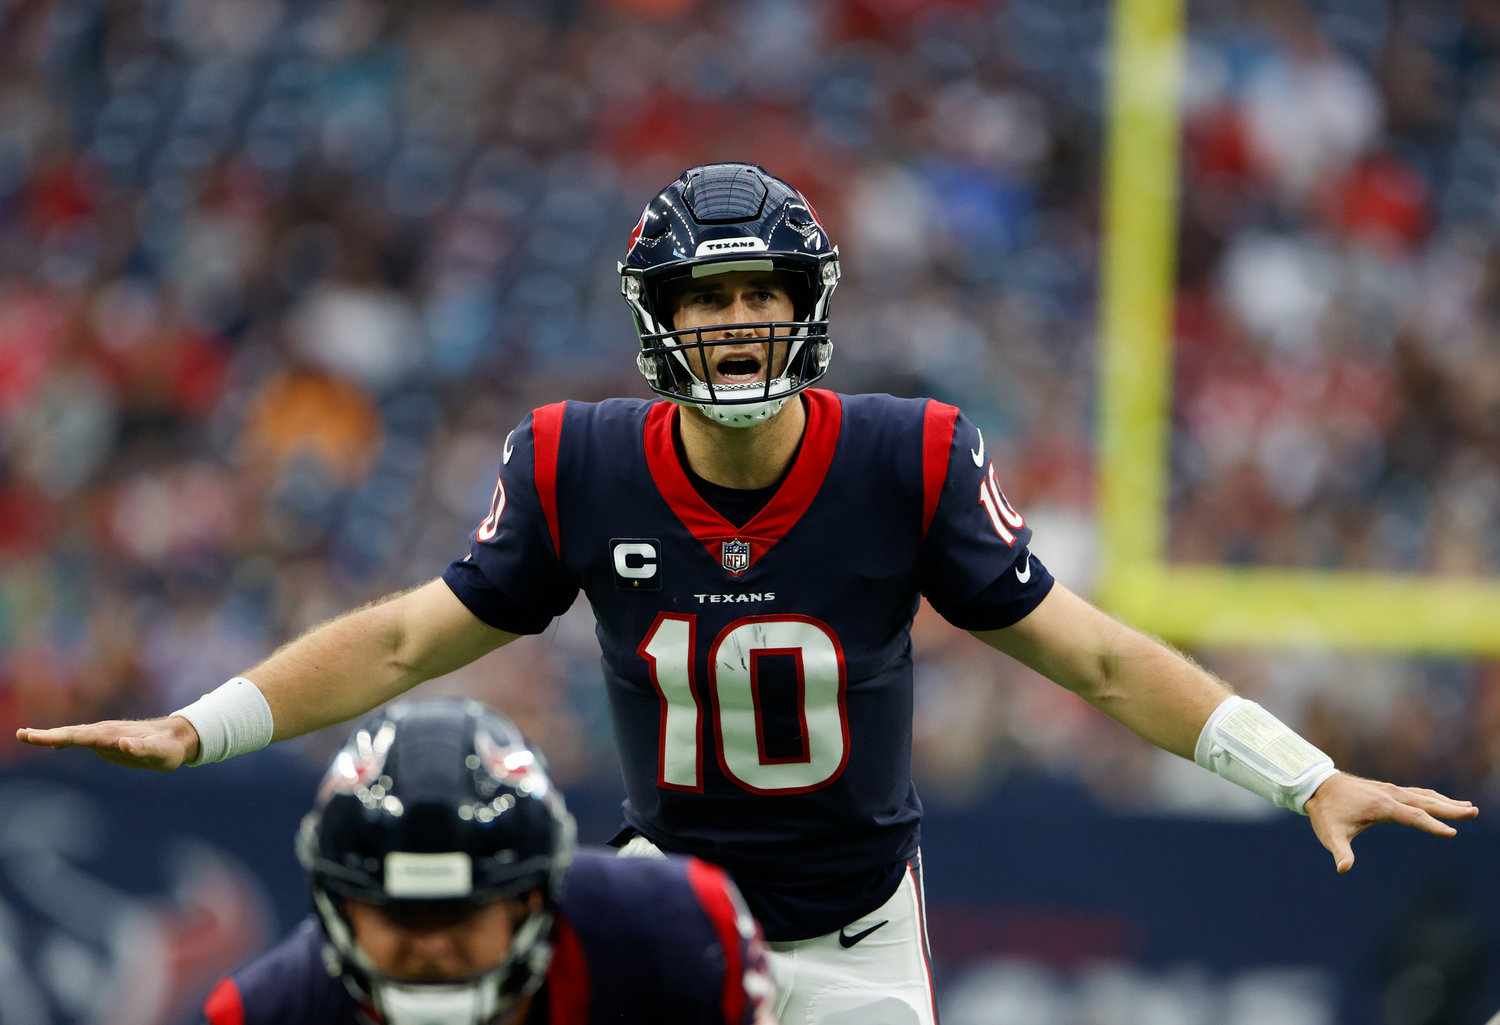 Texans quarterback Davis Mills (10) calls signals before a snap during an NFL game between the Houston Texans and the Jacksonville Jaguars on Jan. 1, 2023 in Houston. The Jaguars won, 31-3.